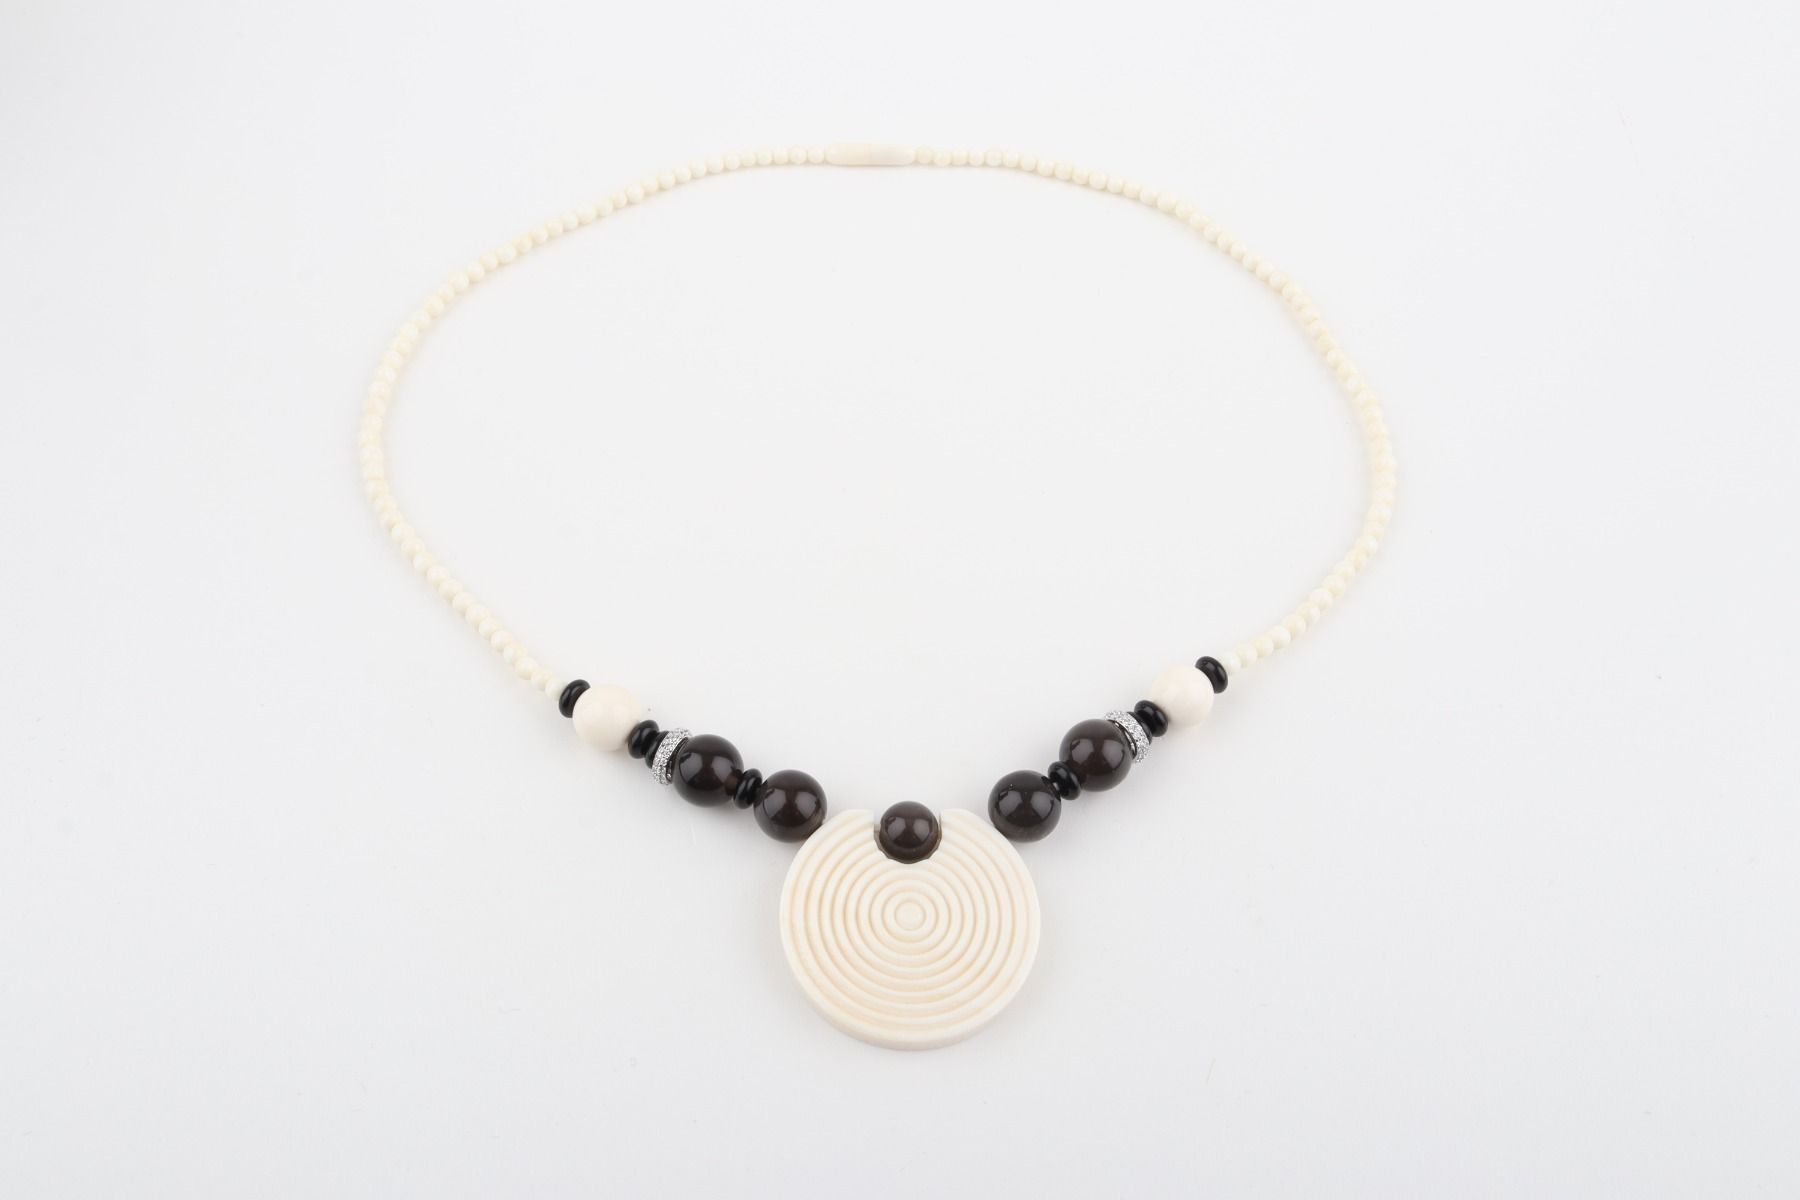 Mammoth Ivory & Agate Statement Necklace